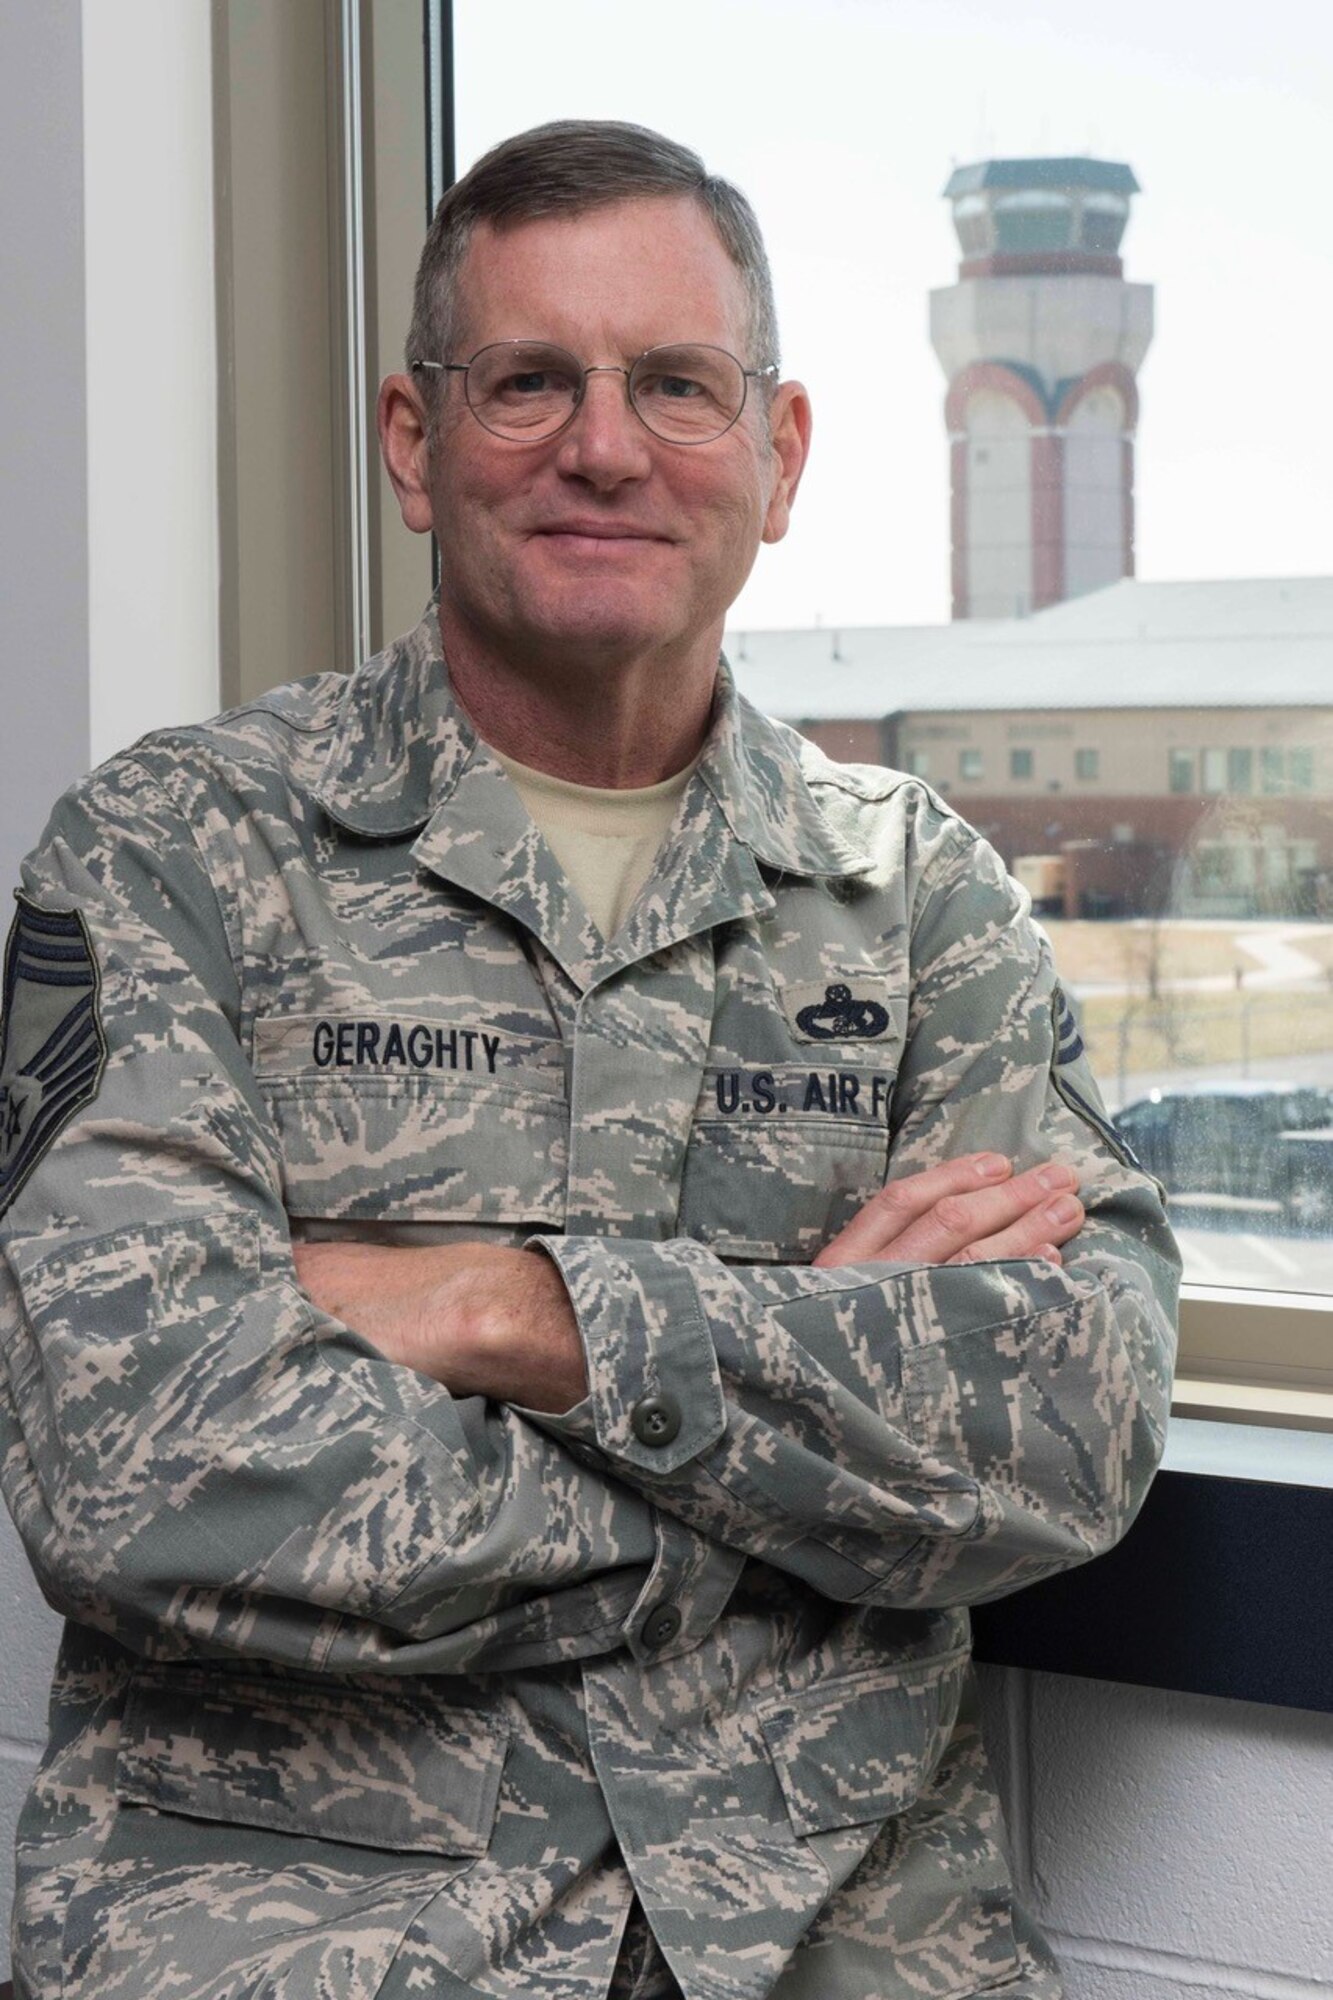 Chief Master Sgt. Geraghty is the 167th Logistics Readiness Squadron superintendent and is the 167th Airlift Wing’s Airman Spotlight for March 2019. (U.S. Air National Guard photo by Senior Master Sgt. Emily Beightol-Deyerle)